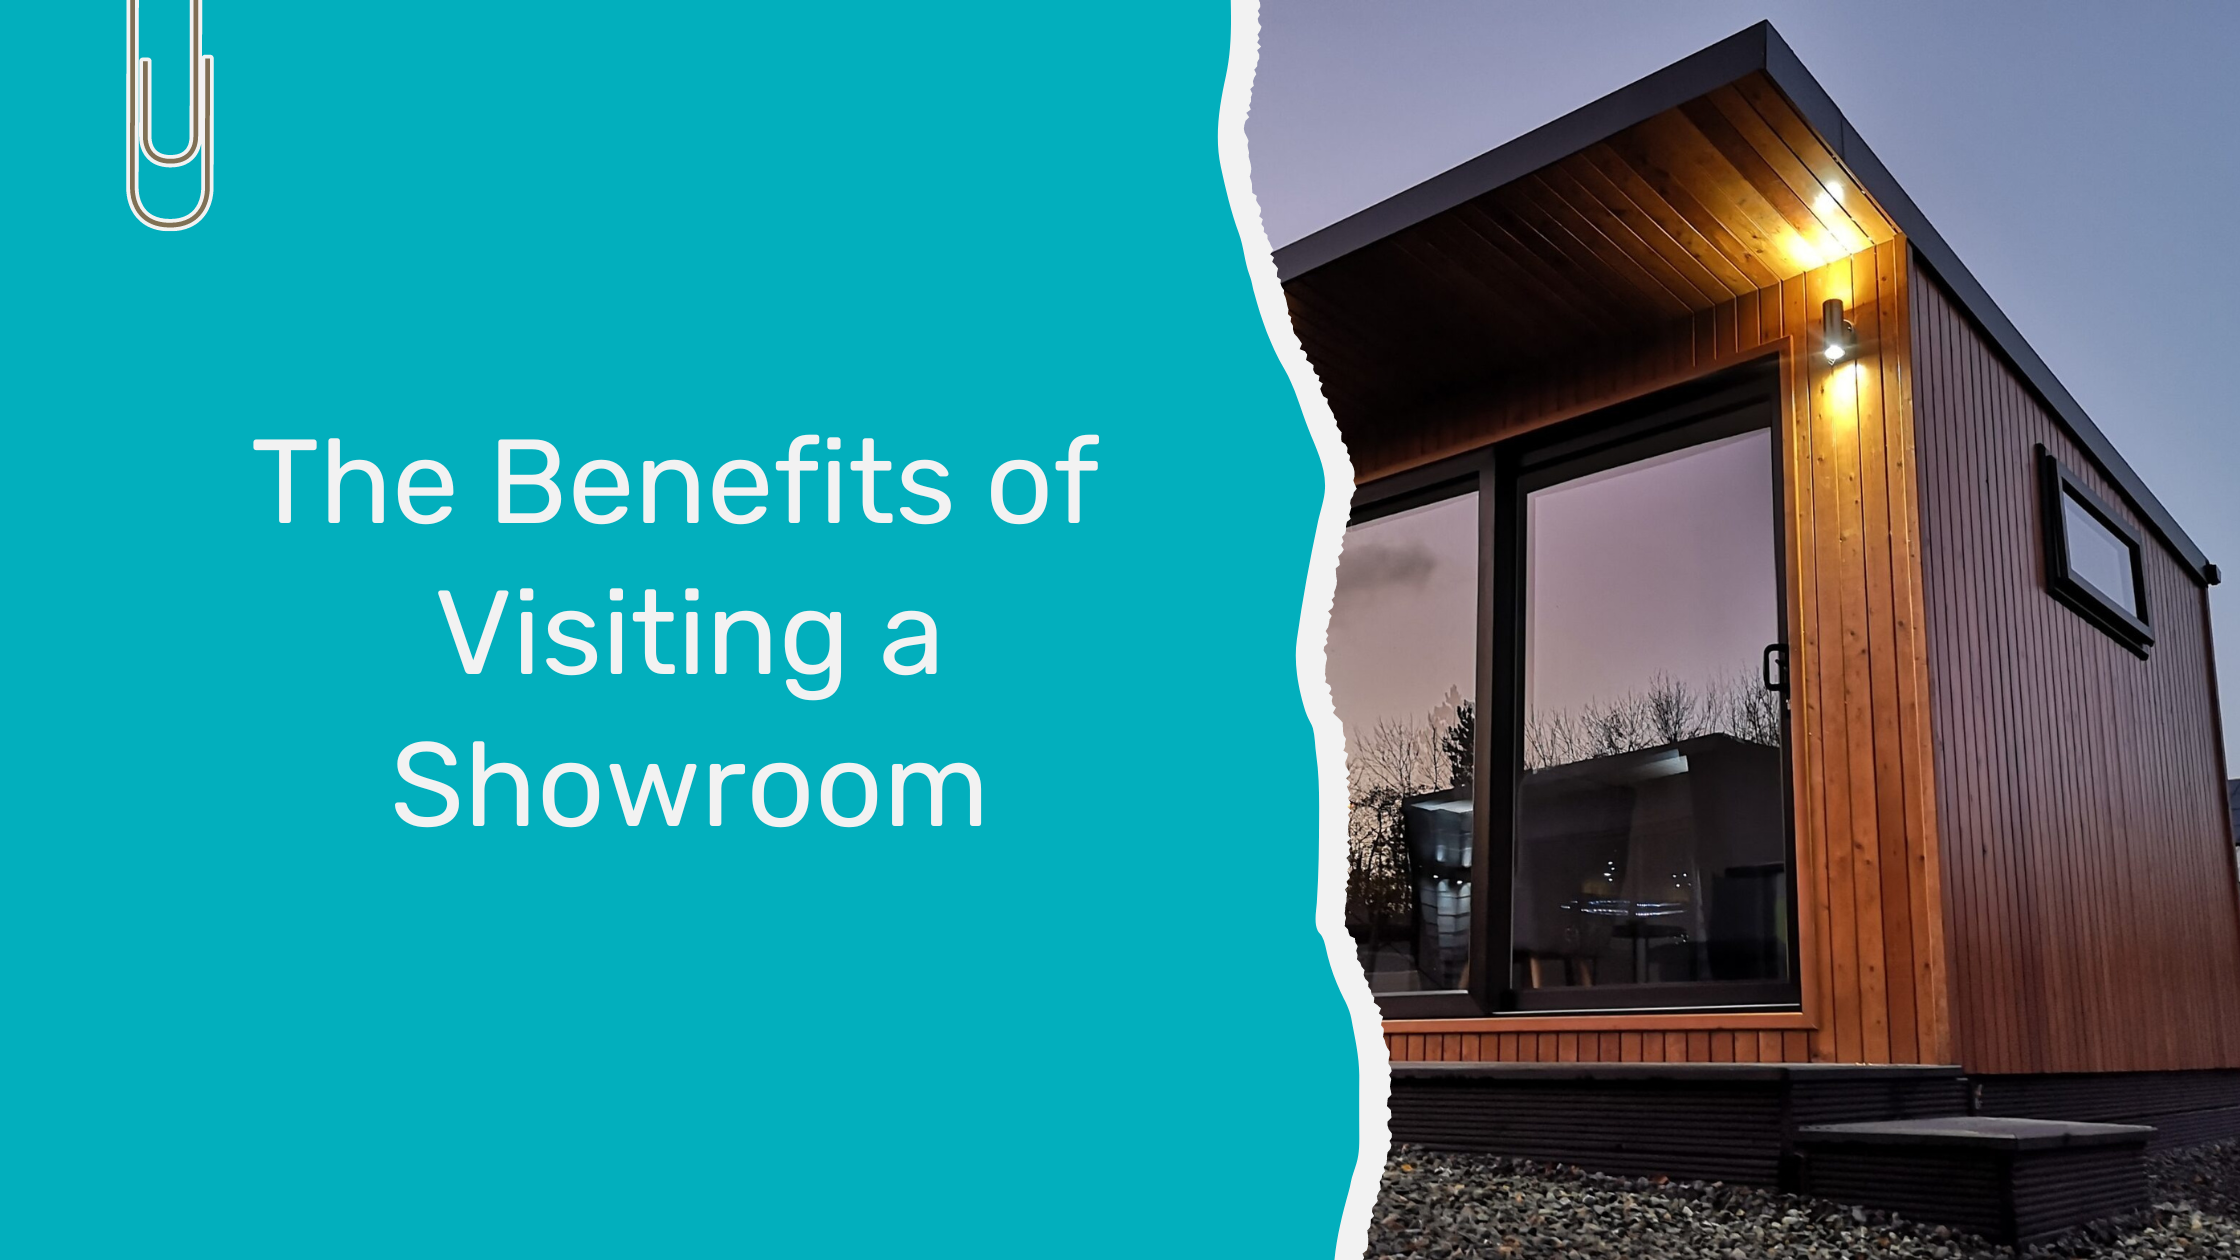 The Benefits of Visiting a Showroom